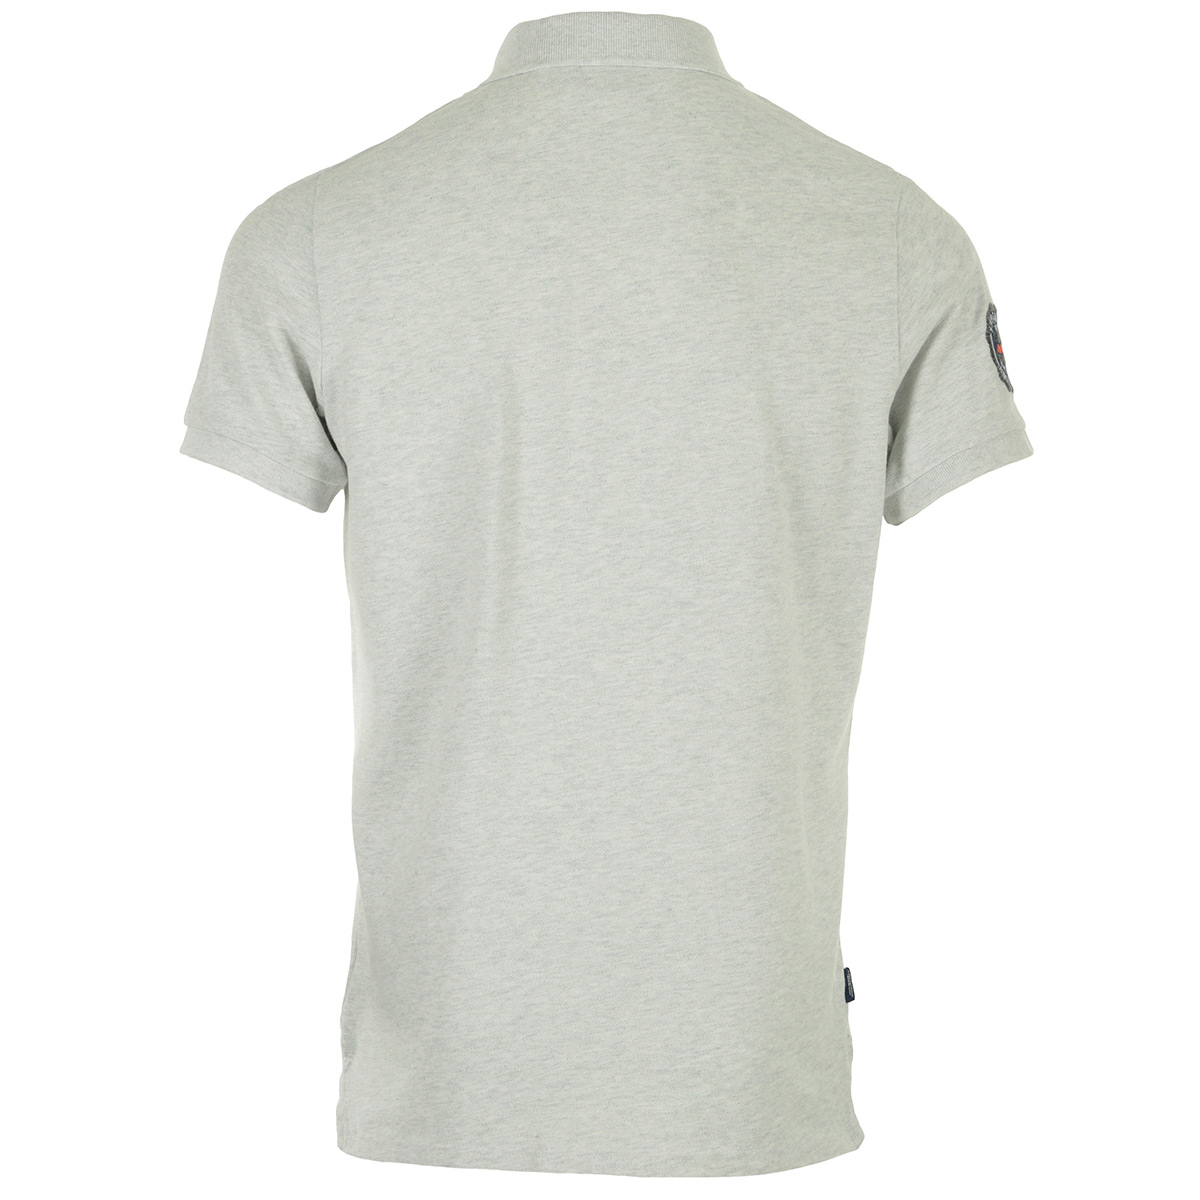 Superdry Classic Superstate Polo